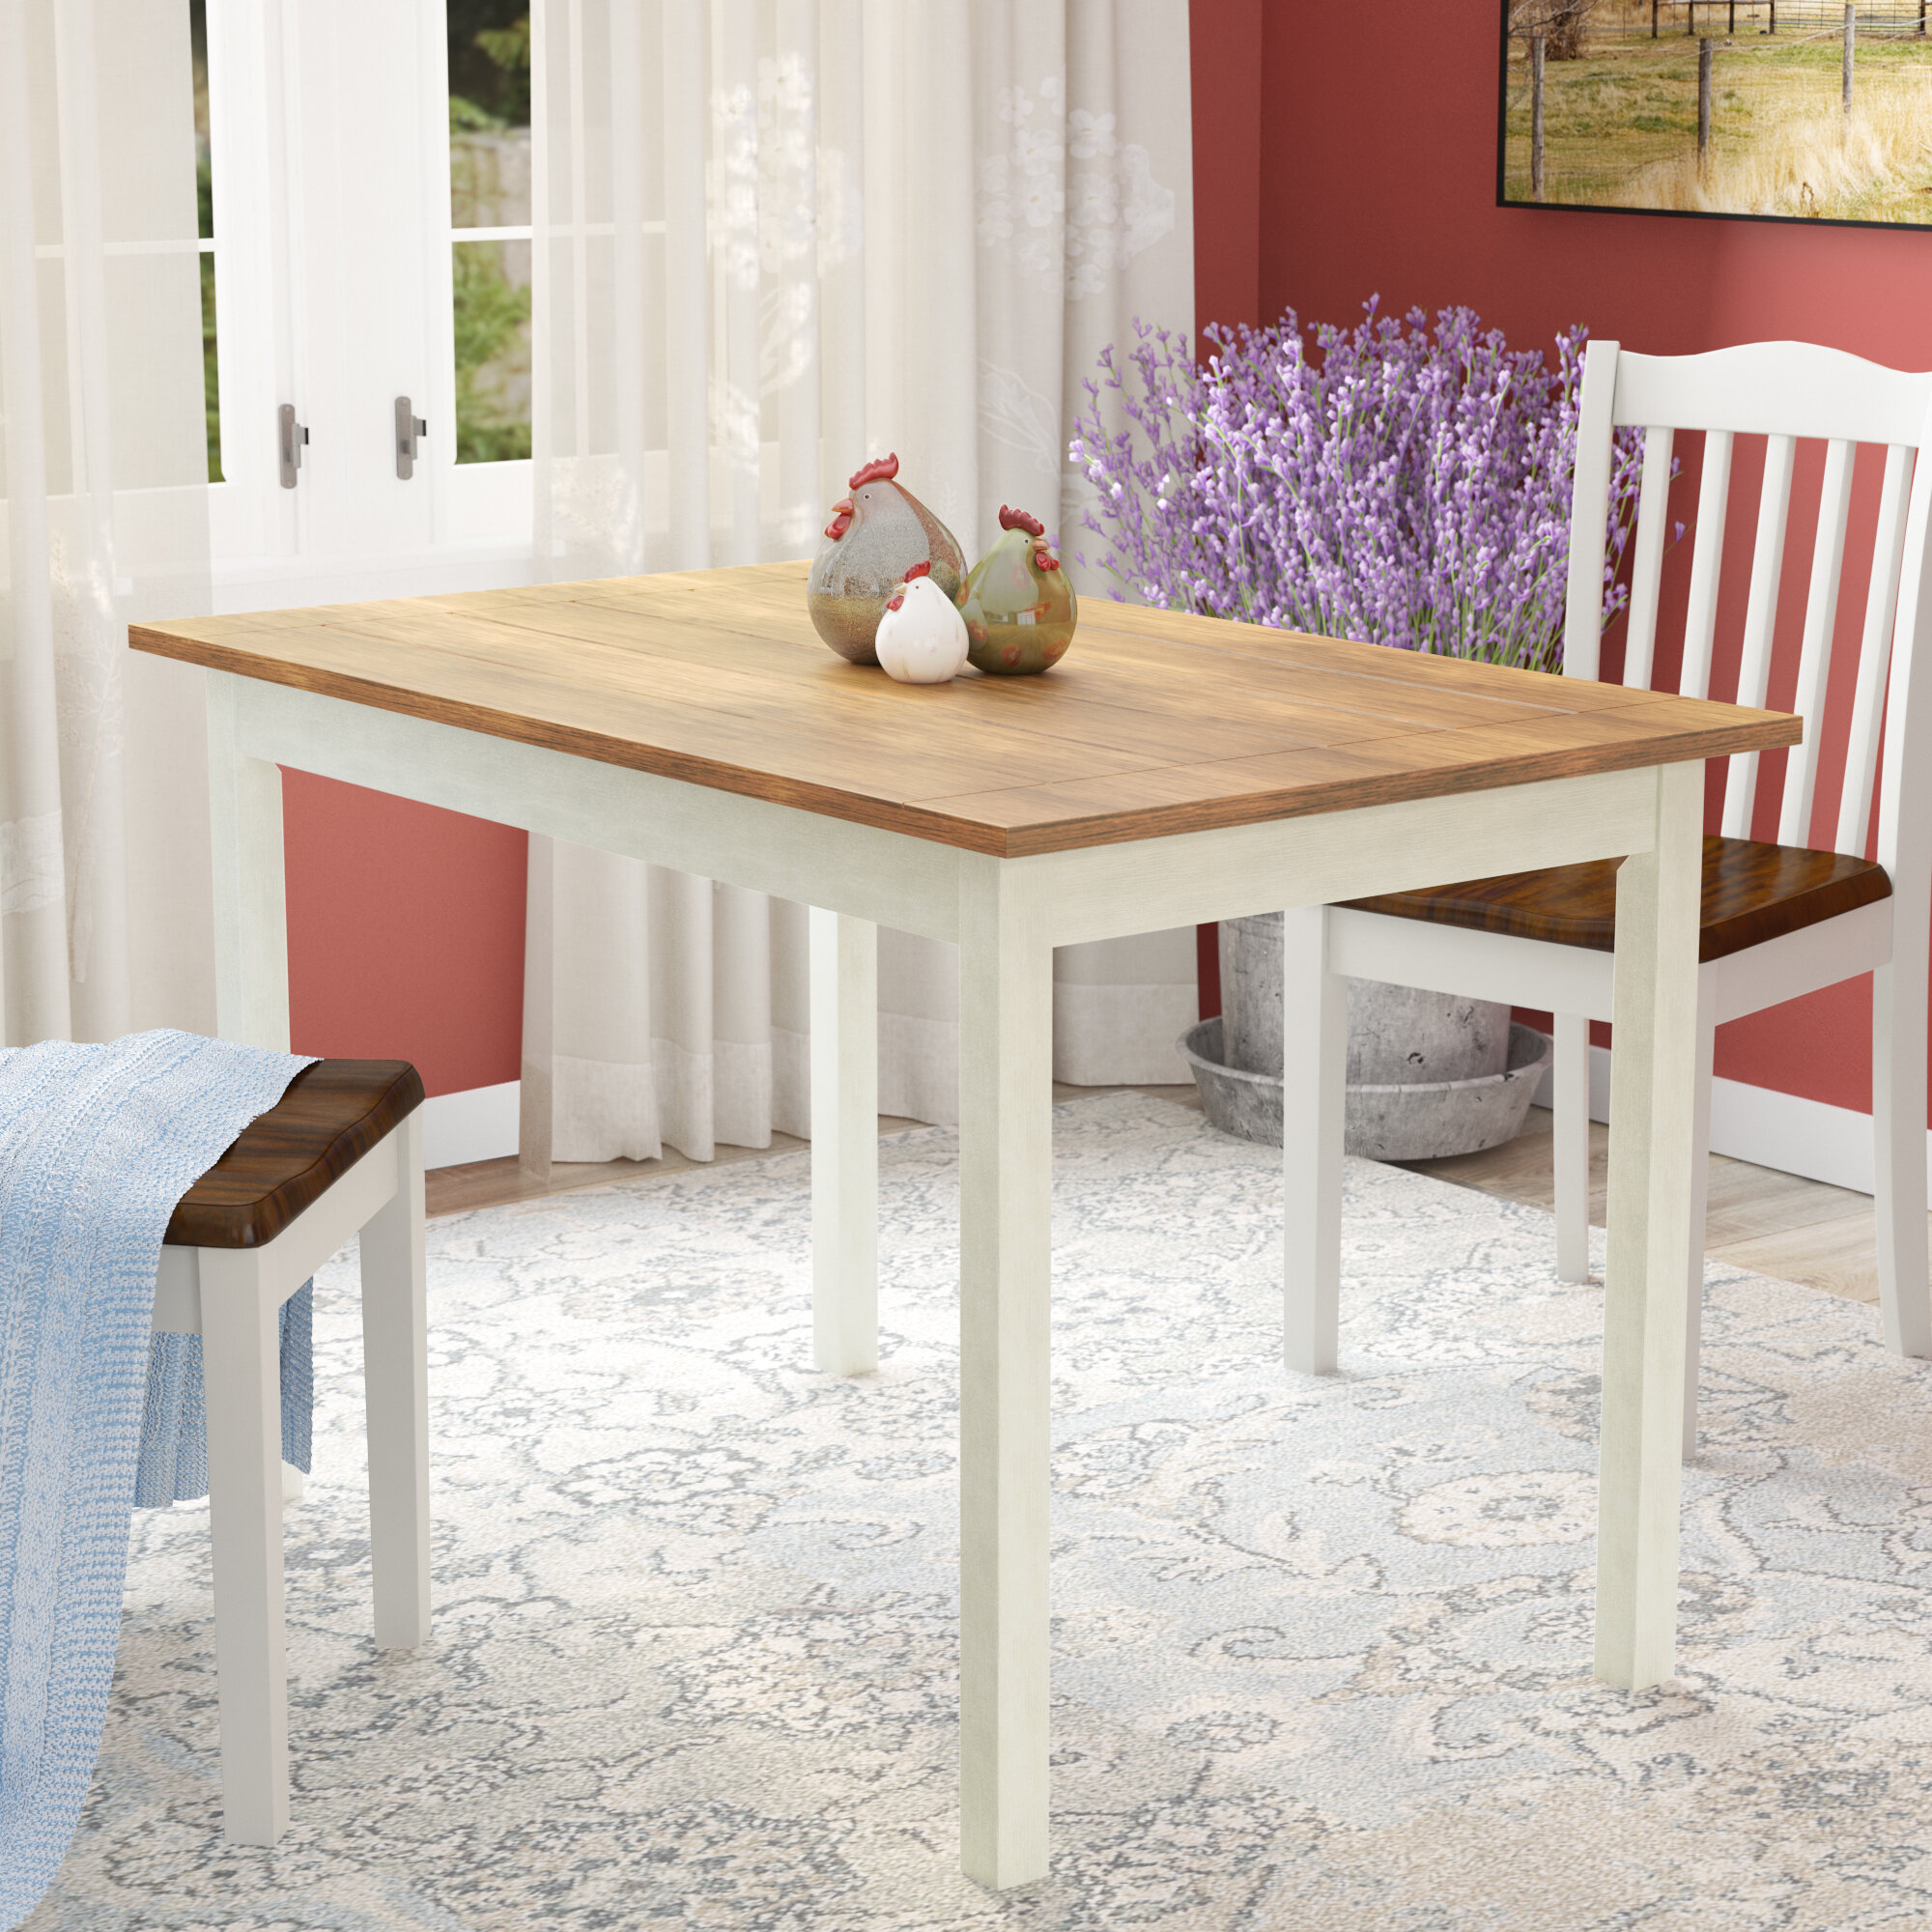 Small 4 Seat Kitchen Dining Tables Free Shipping Over 35 Wayfair